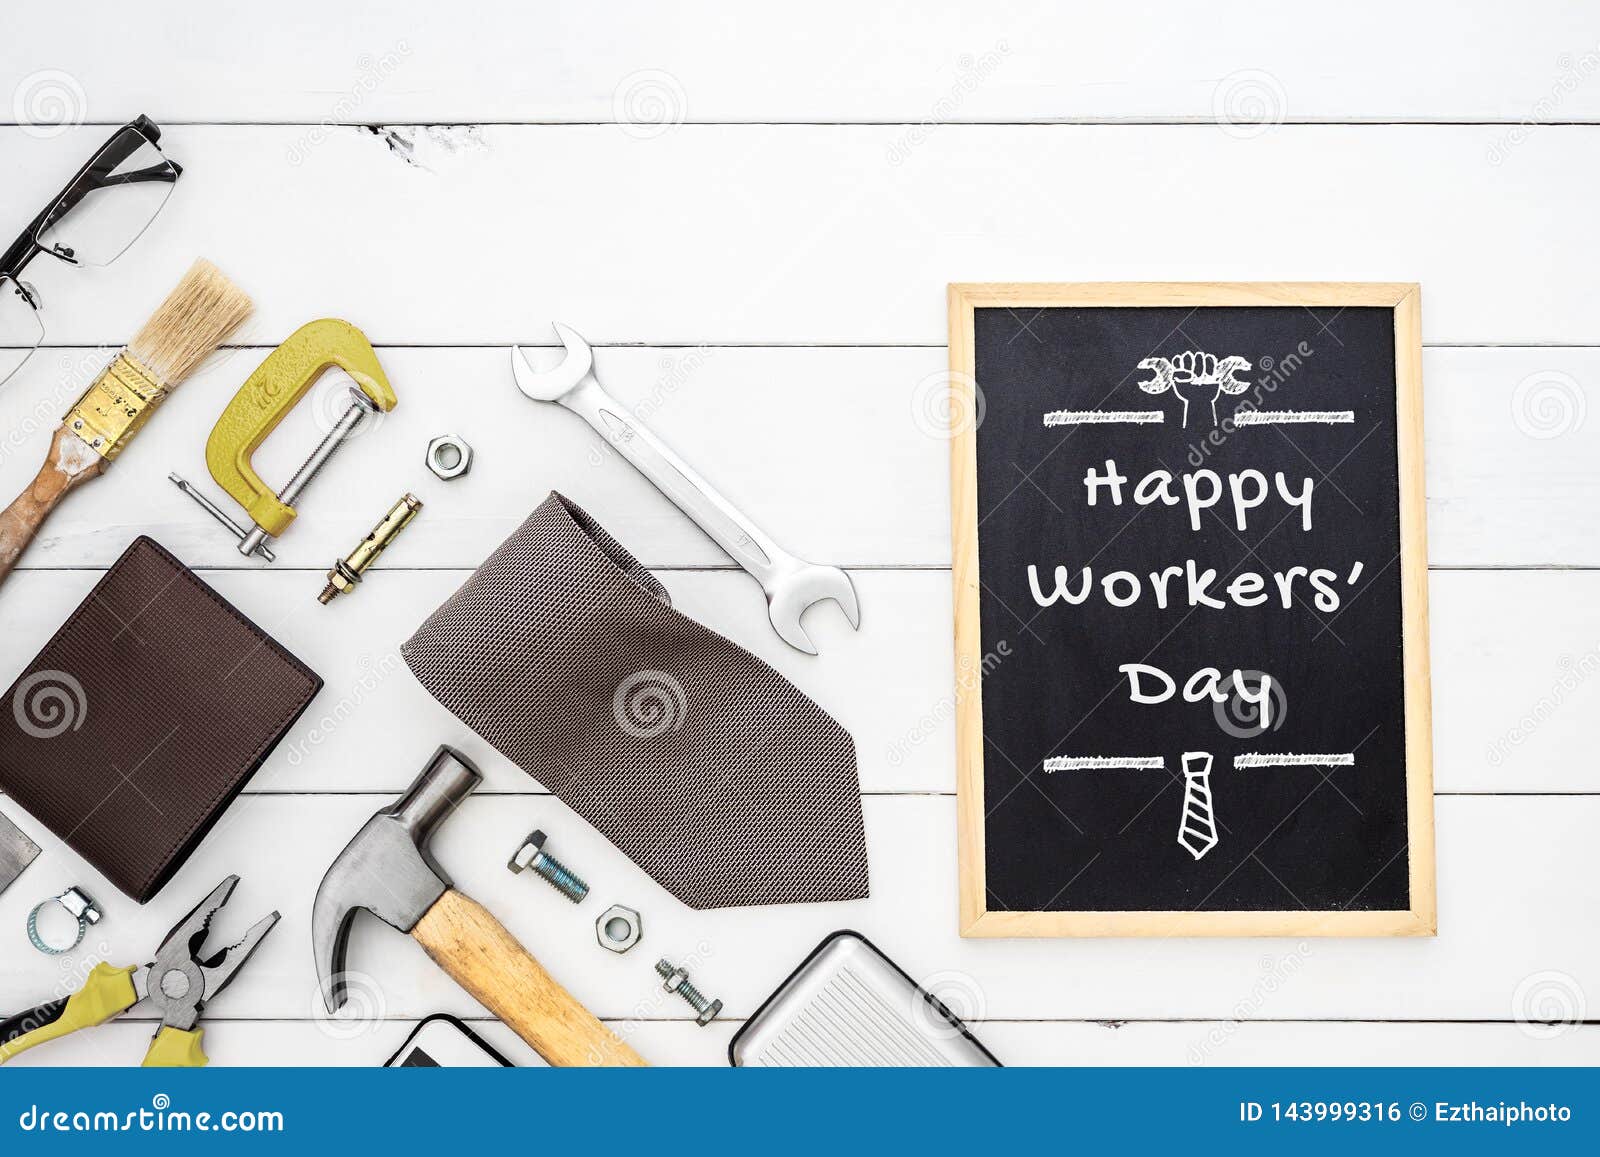 happy workers` day background concept. flat lay of construction blue collar handy tools and white collar`s accessories over wood